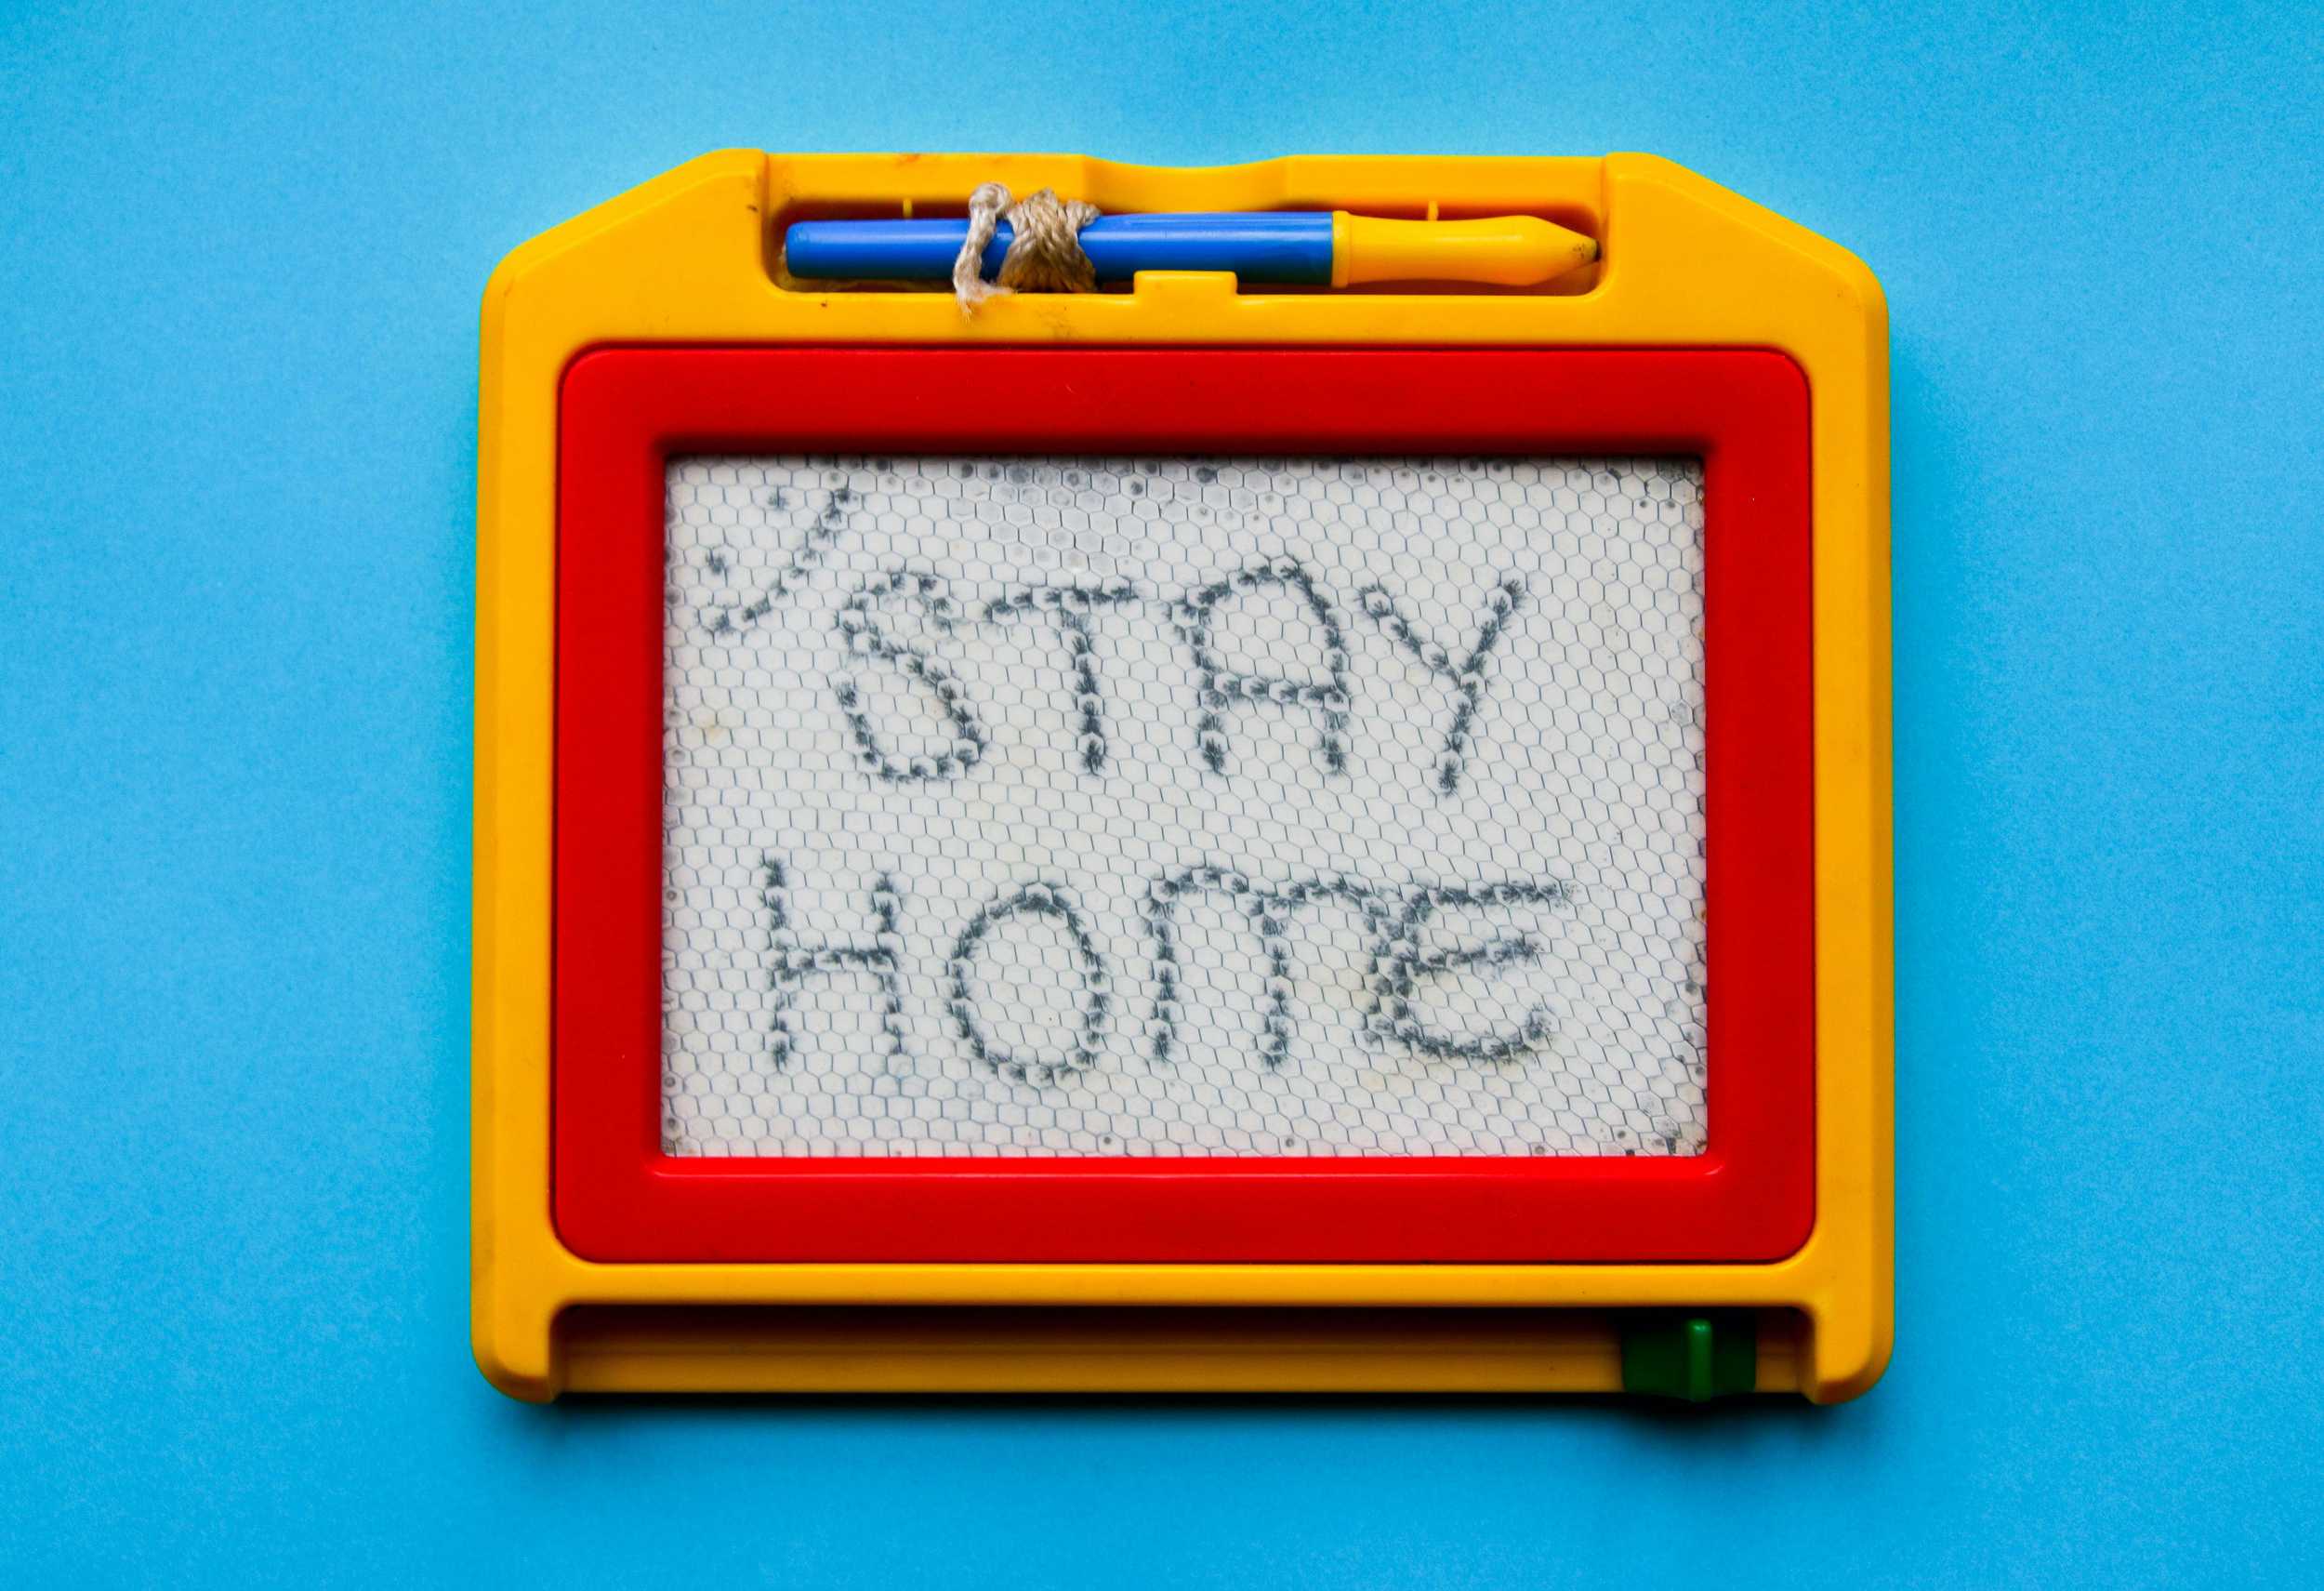 stay home sign